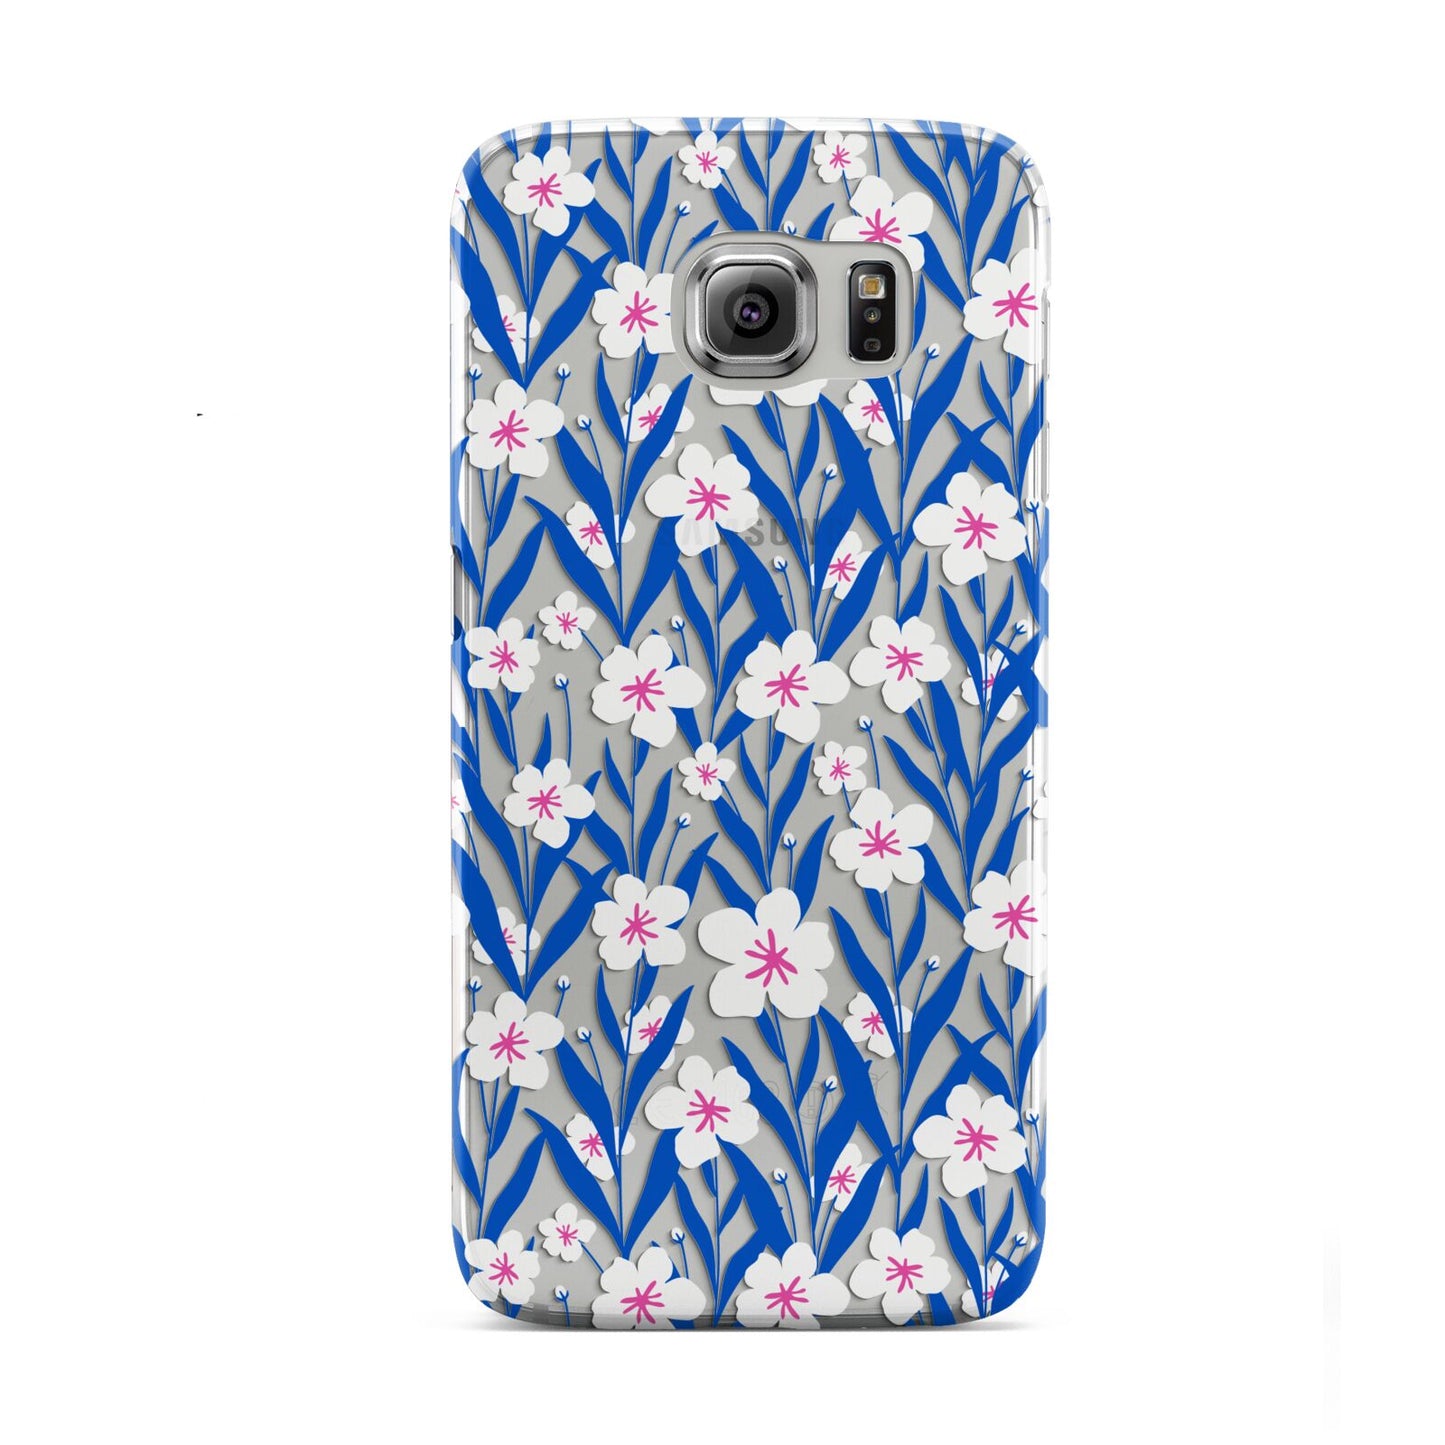 Blue and White Flowers Samsung Galaxy S6 Case